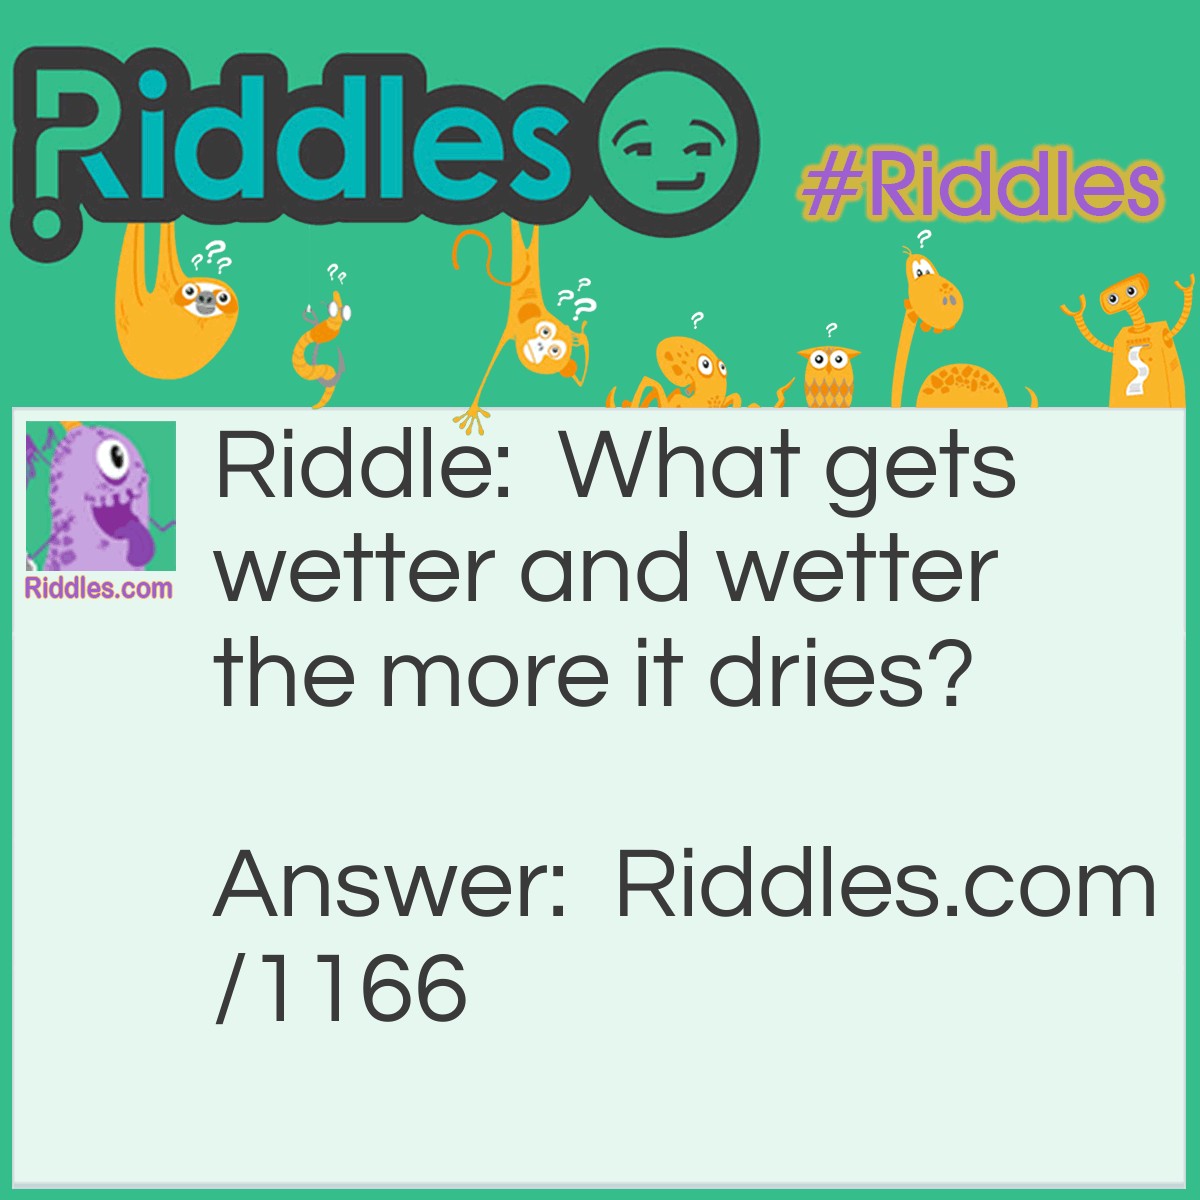 Riddle: What gets wetter and wetter the more it dries? Answer: a towel